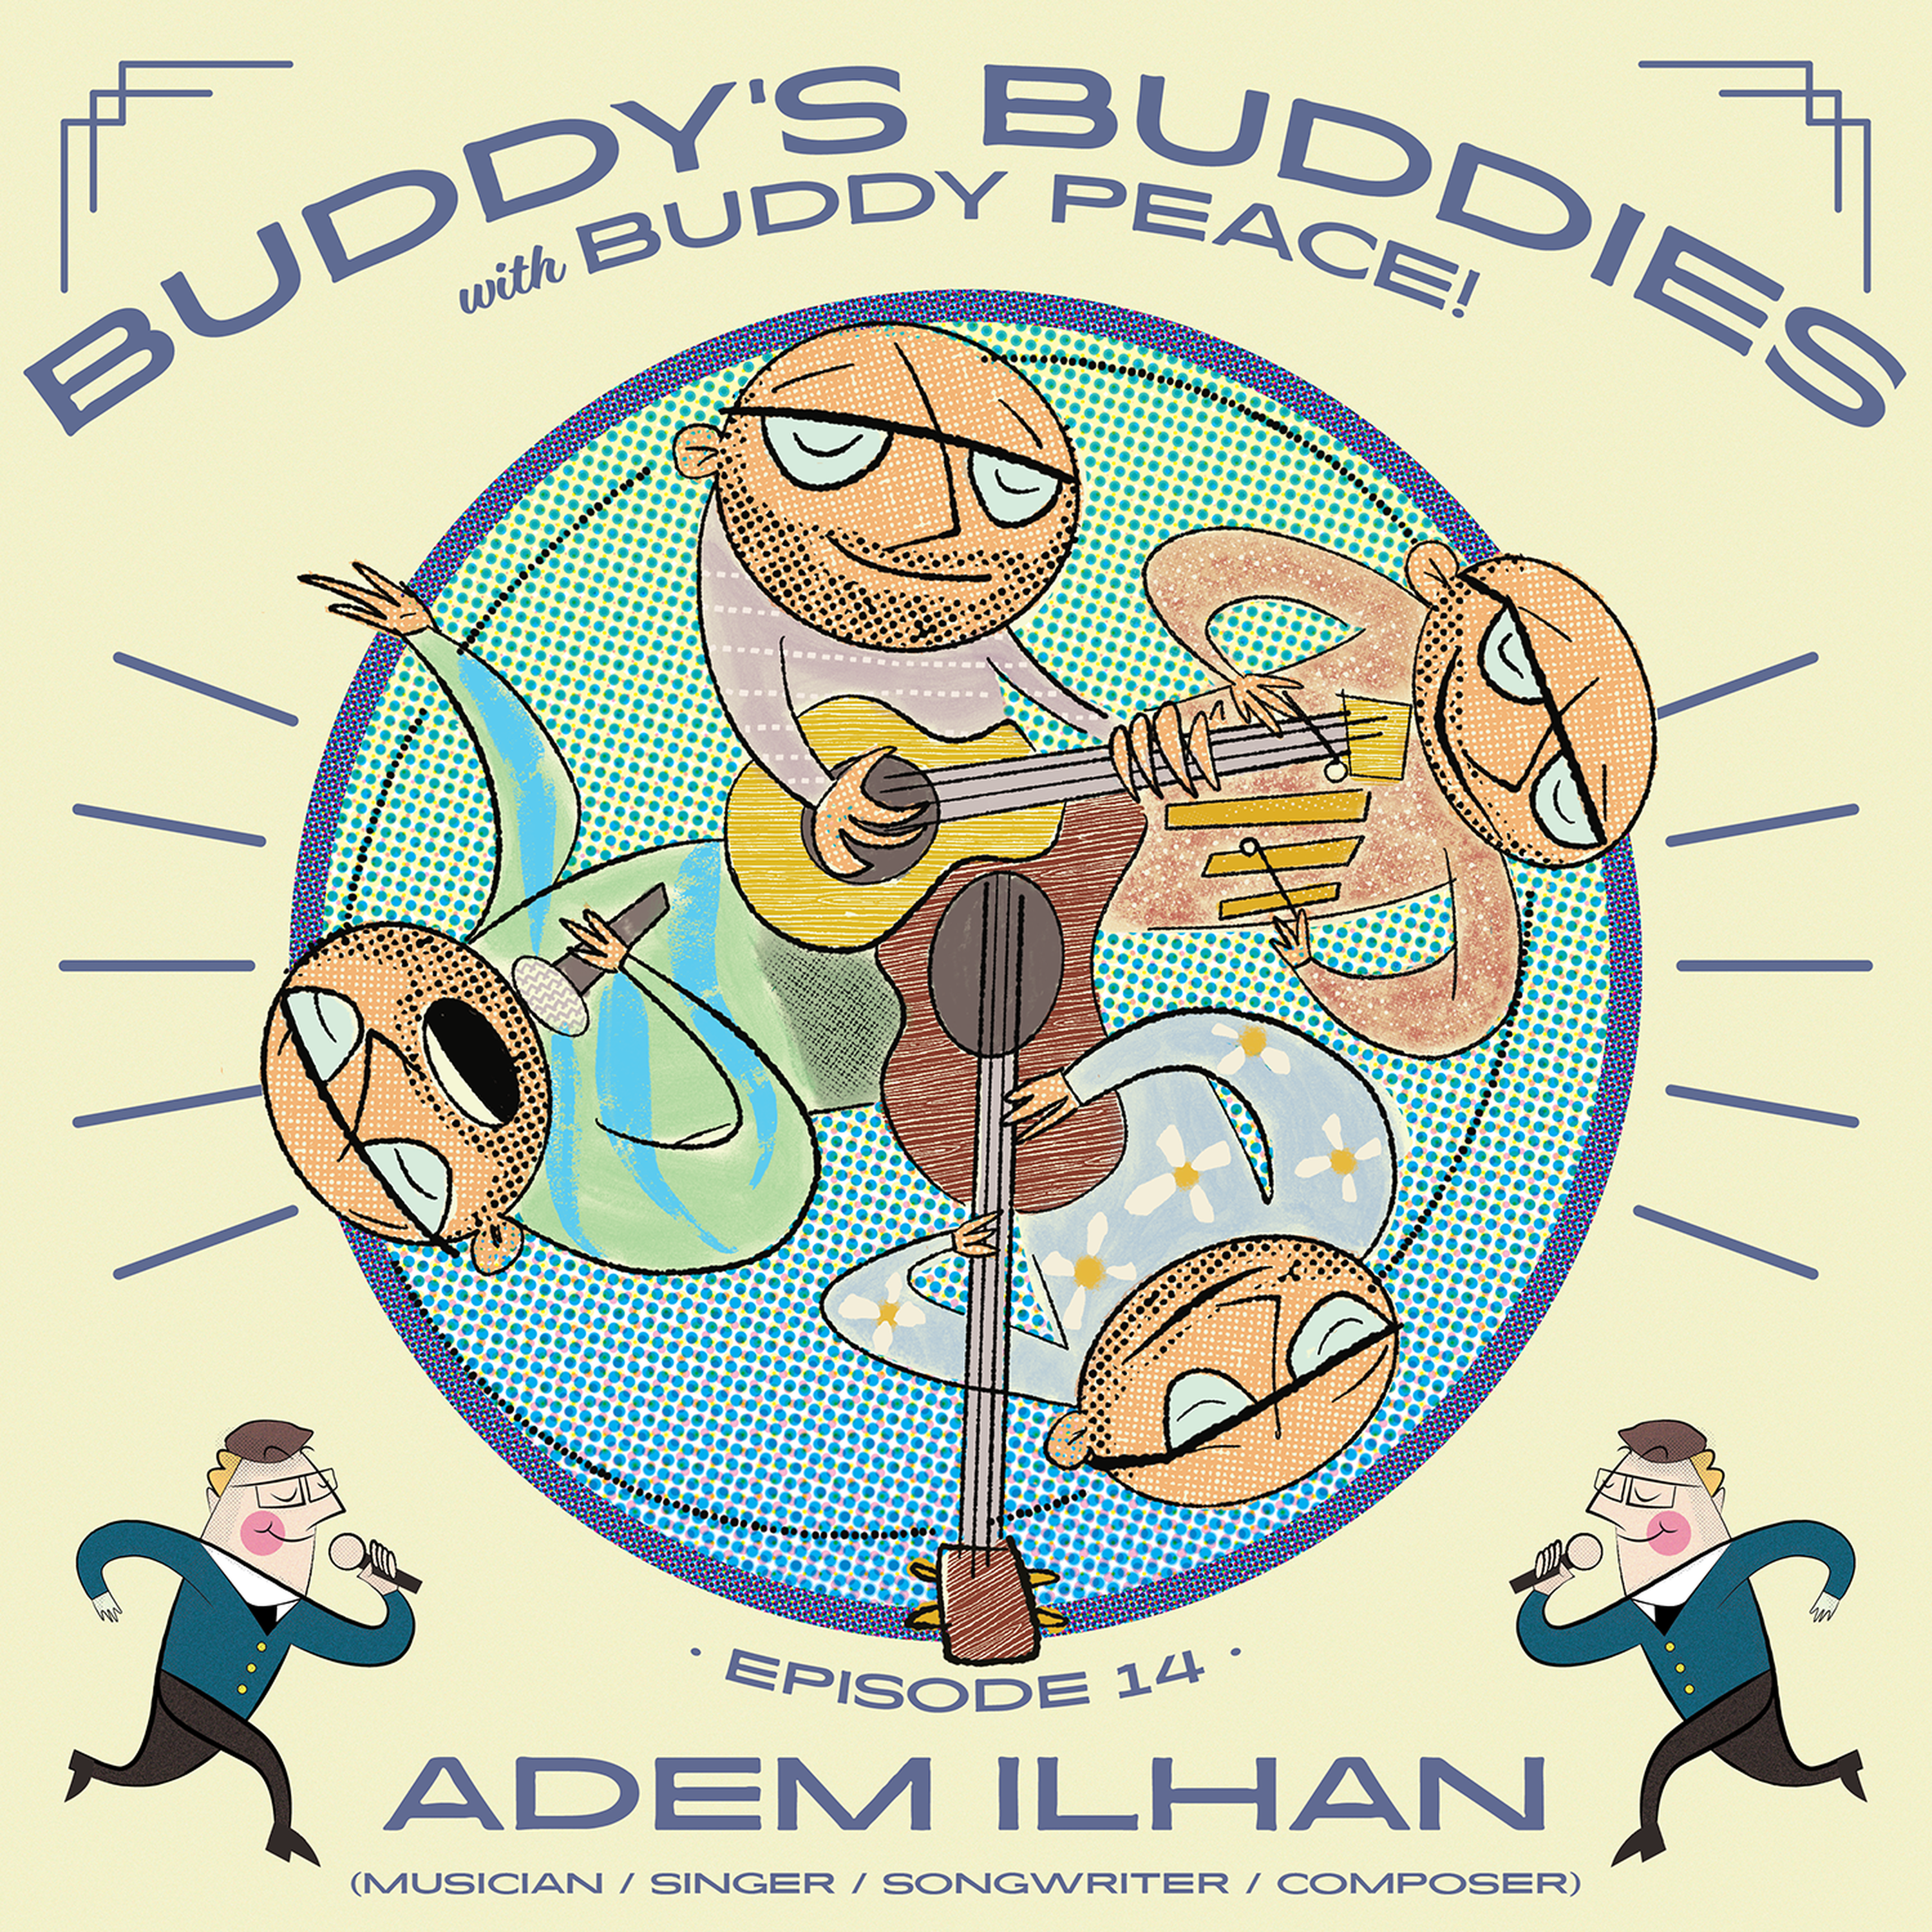 cover art for Adem Ilhan (musician / singer / songwriter / composer) • Buddy's Buddies #014